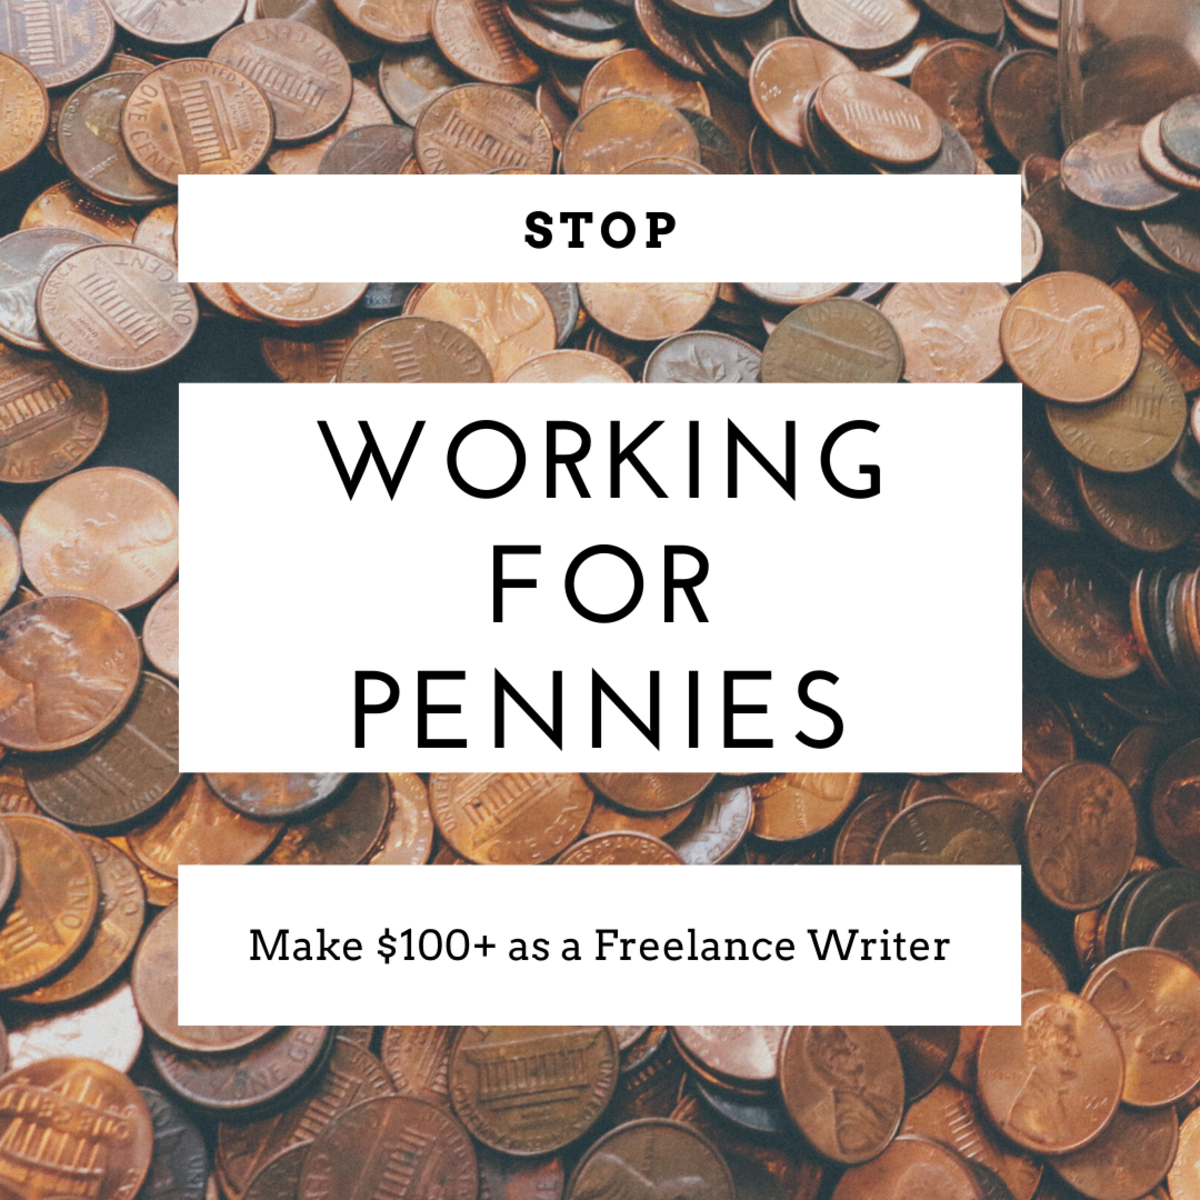 Learn how to make $100+ by writing freelance articles!